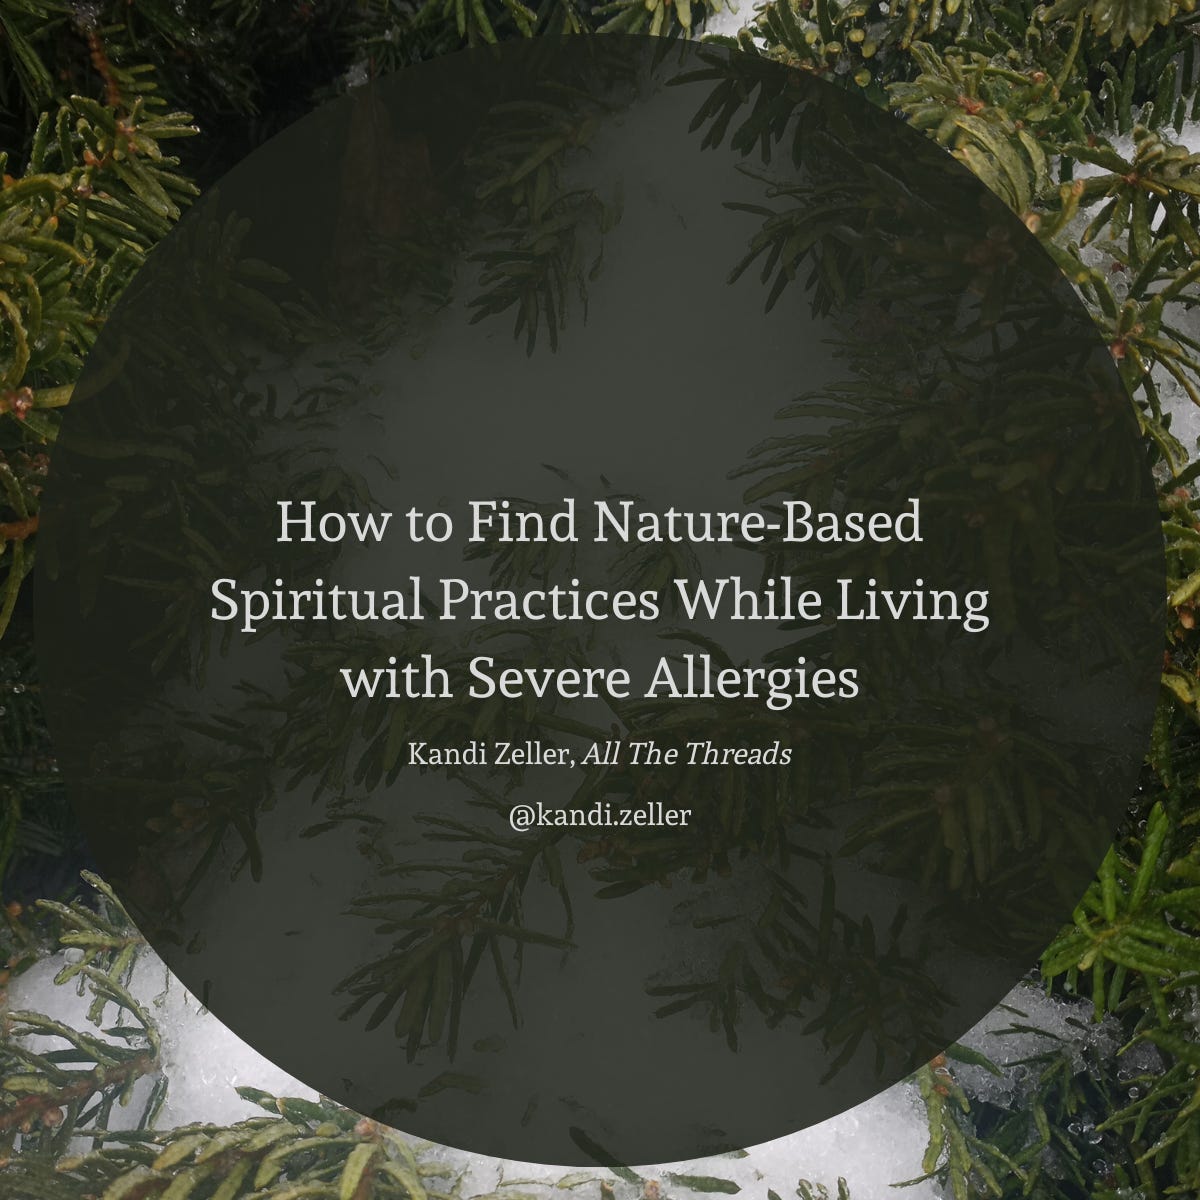 A background of a green bush, covered with patchy snow. On top of the background is a somewhat transparent black circle. On the black circle is white lettering that reads, “How to Find Nature-Based Spiritual Practices While Living with Severe Allergies, Kandi Zeller, All The Threads, @kandi.zeller"